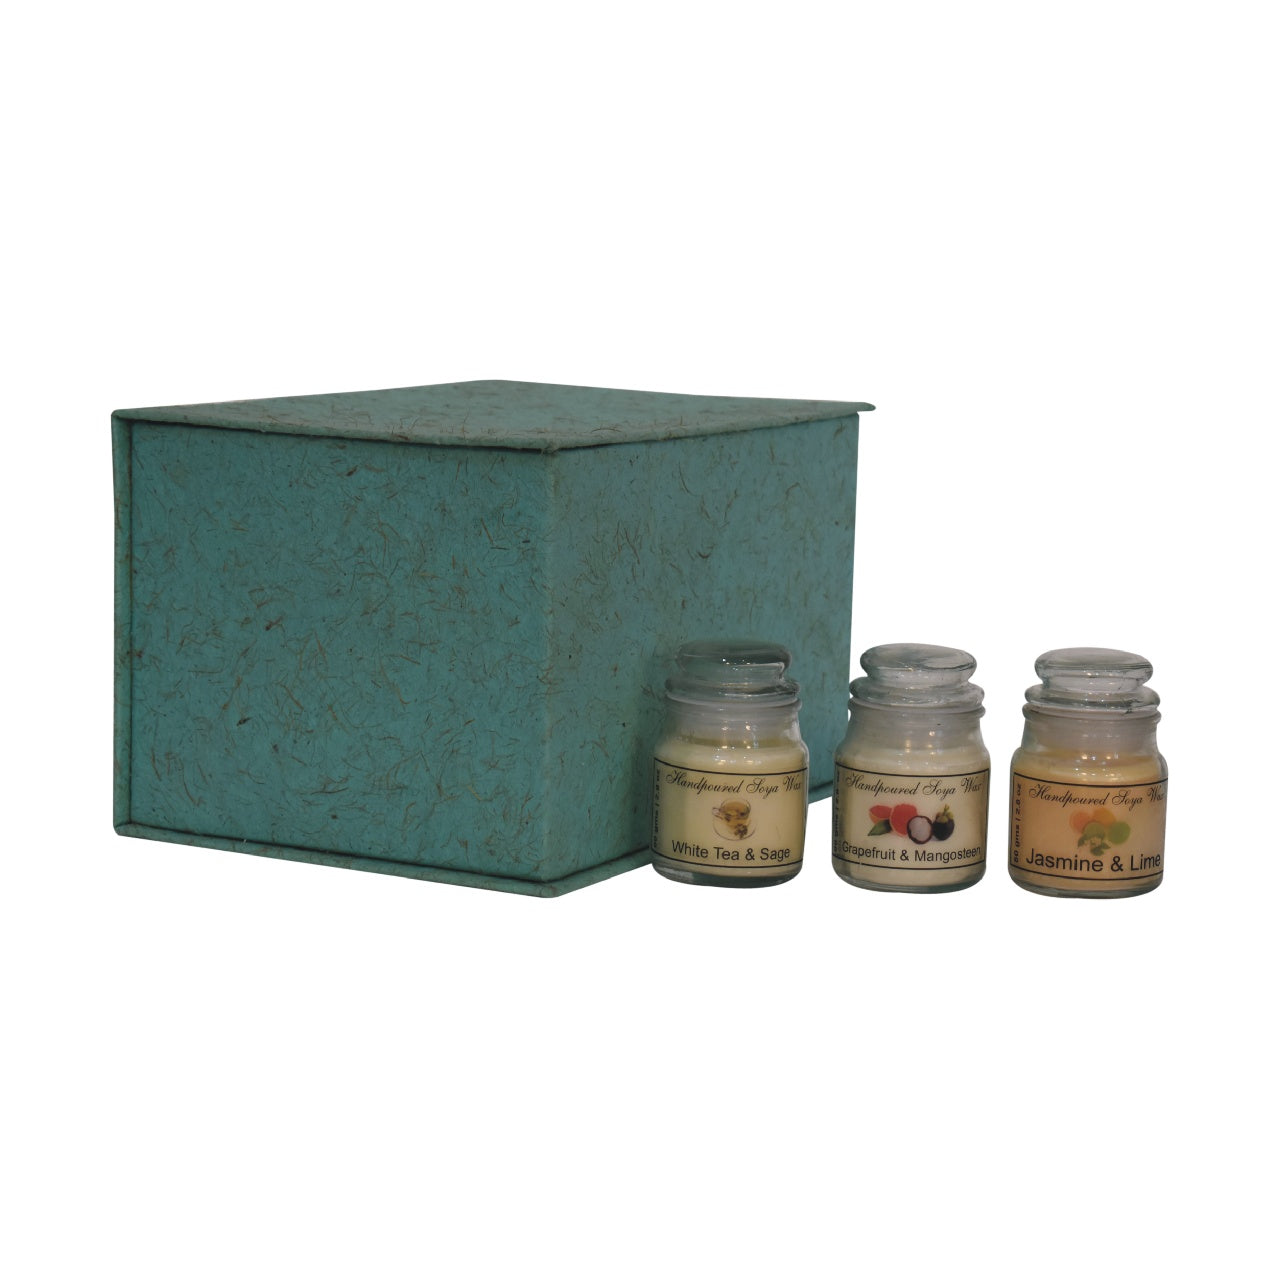 Hourglass Candle Set of 3 (White Tea & Sage, Grapefruit & Mangosteen, Jasmine & Lime) - Red Ross Retail-Furniture Specialists 